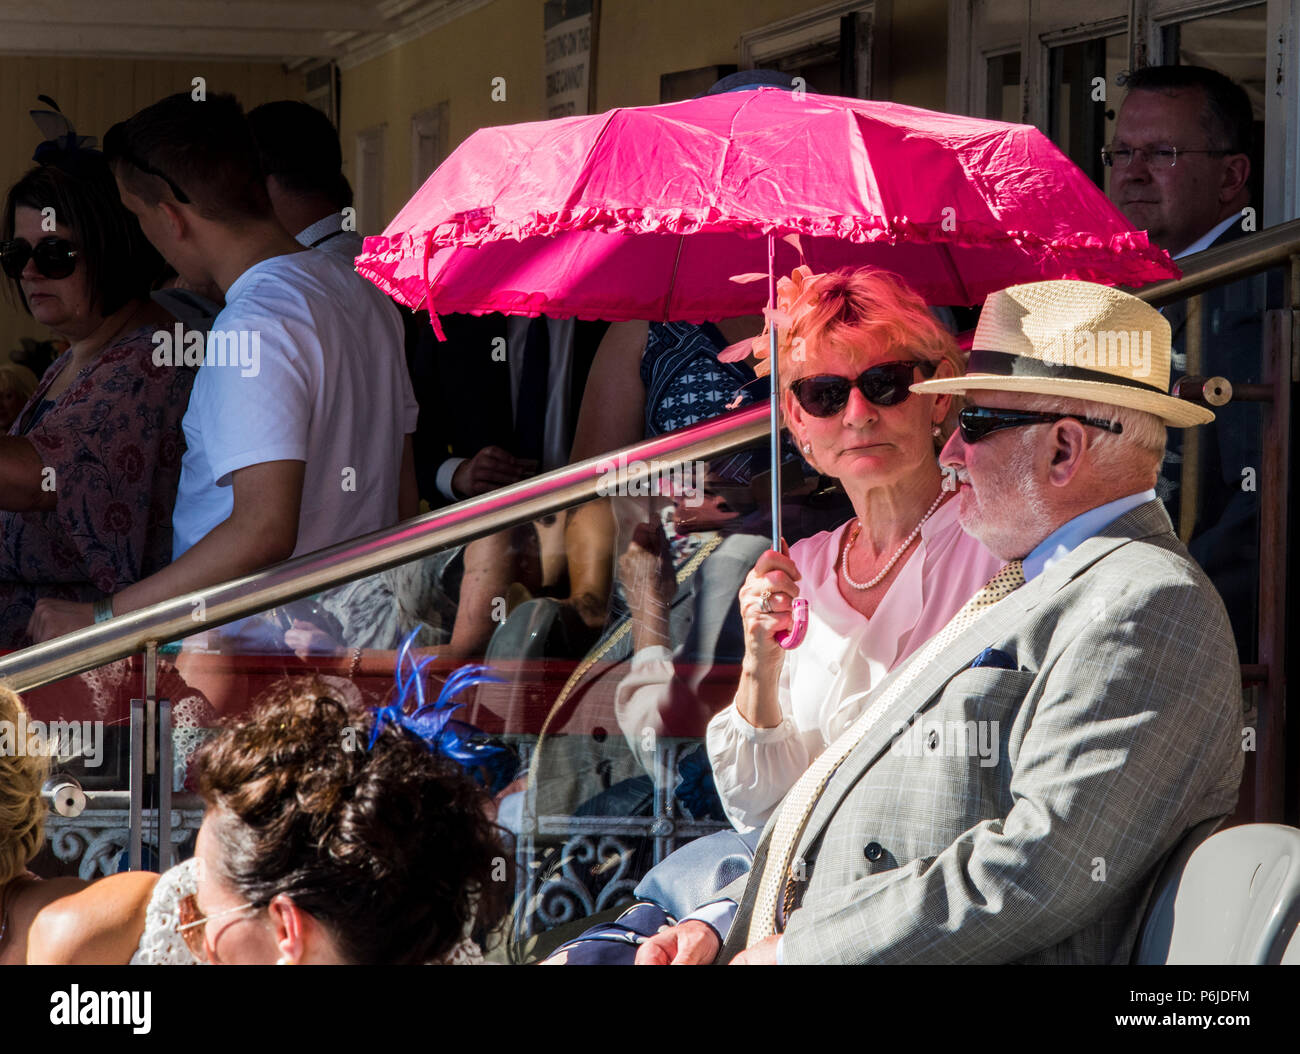 A lady and a gentleman shelter from the sunshine at York Racecourse, holding pink umbrella, York, England, 30th June 2018 Stock Photo